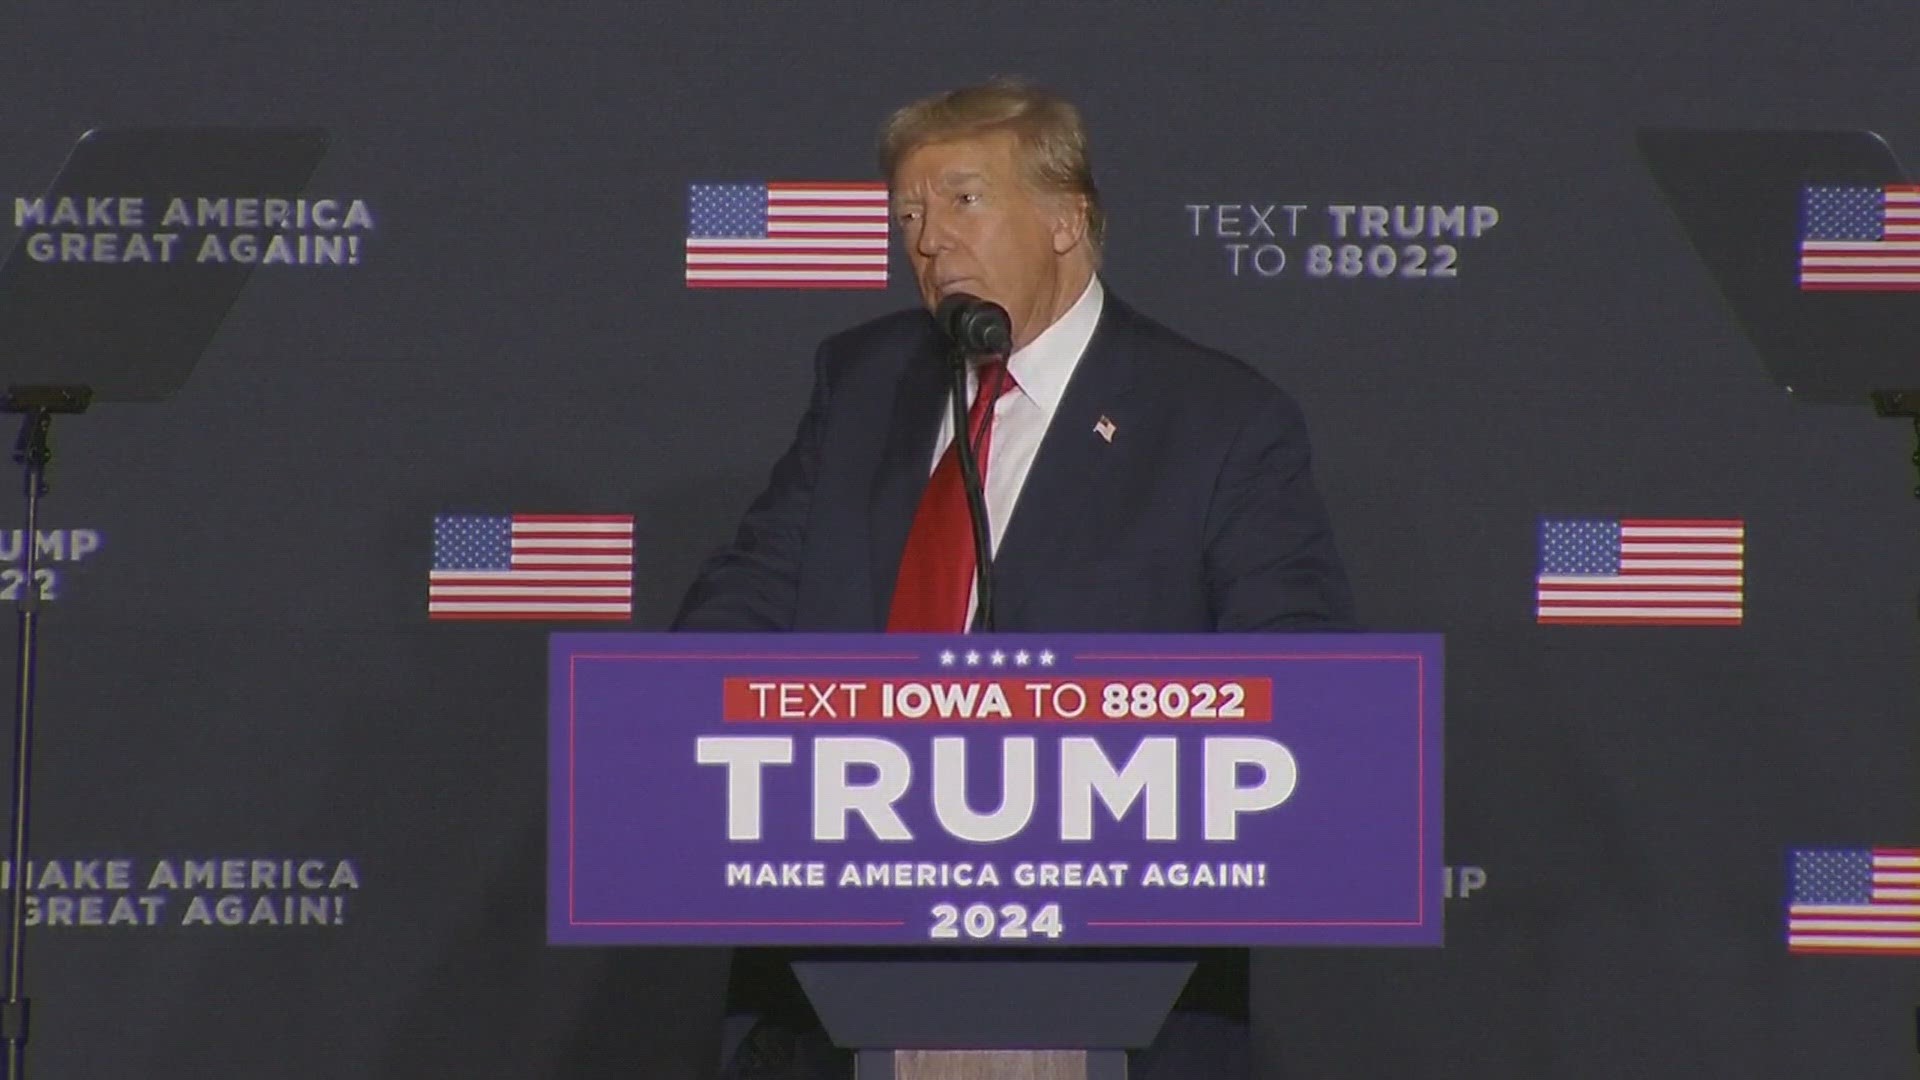 Trump told hundreds of supporters that he predicts a landslide victory in the Iowa caucuses.